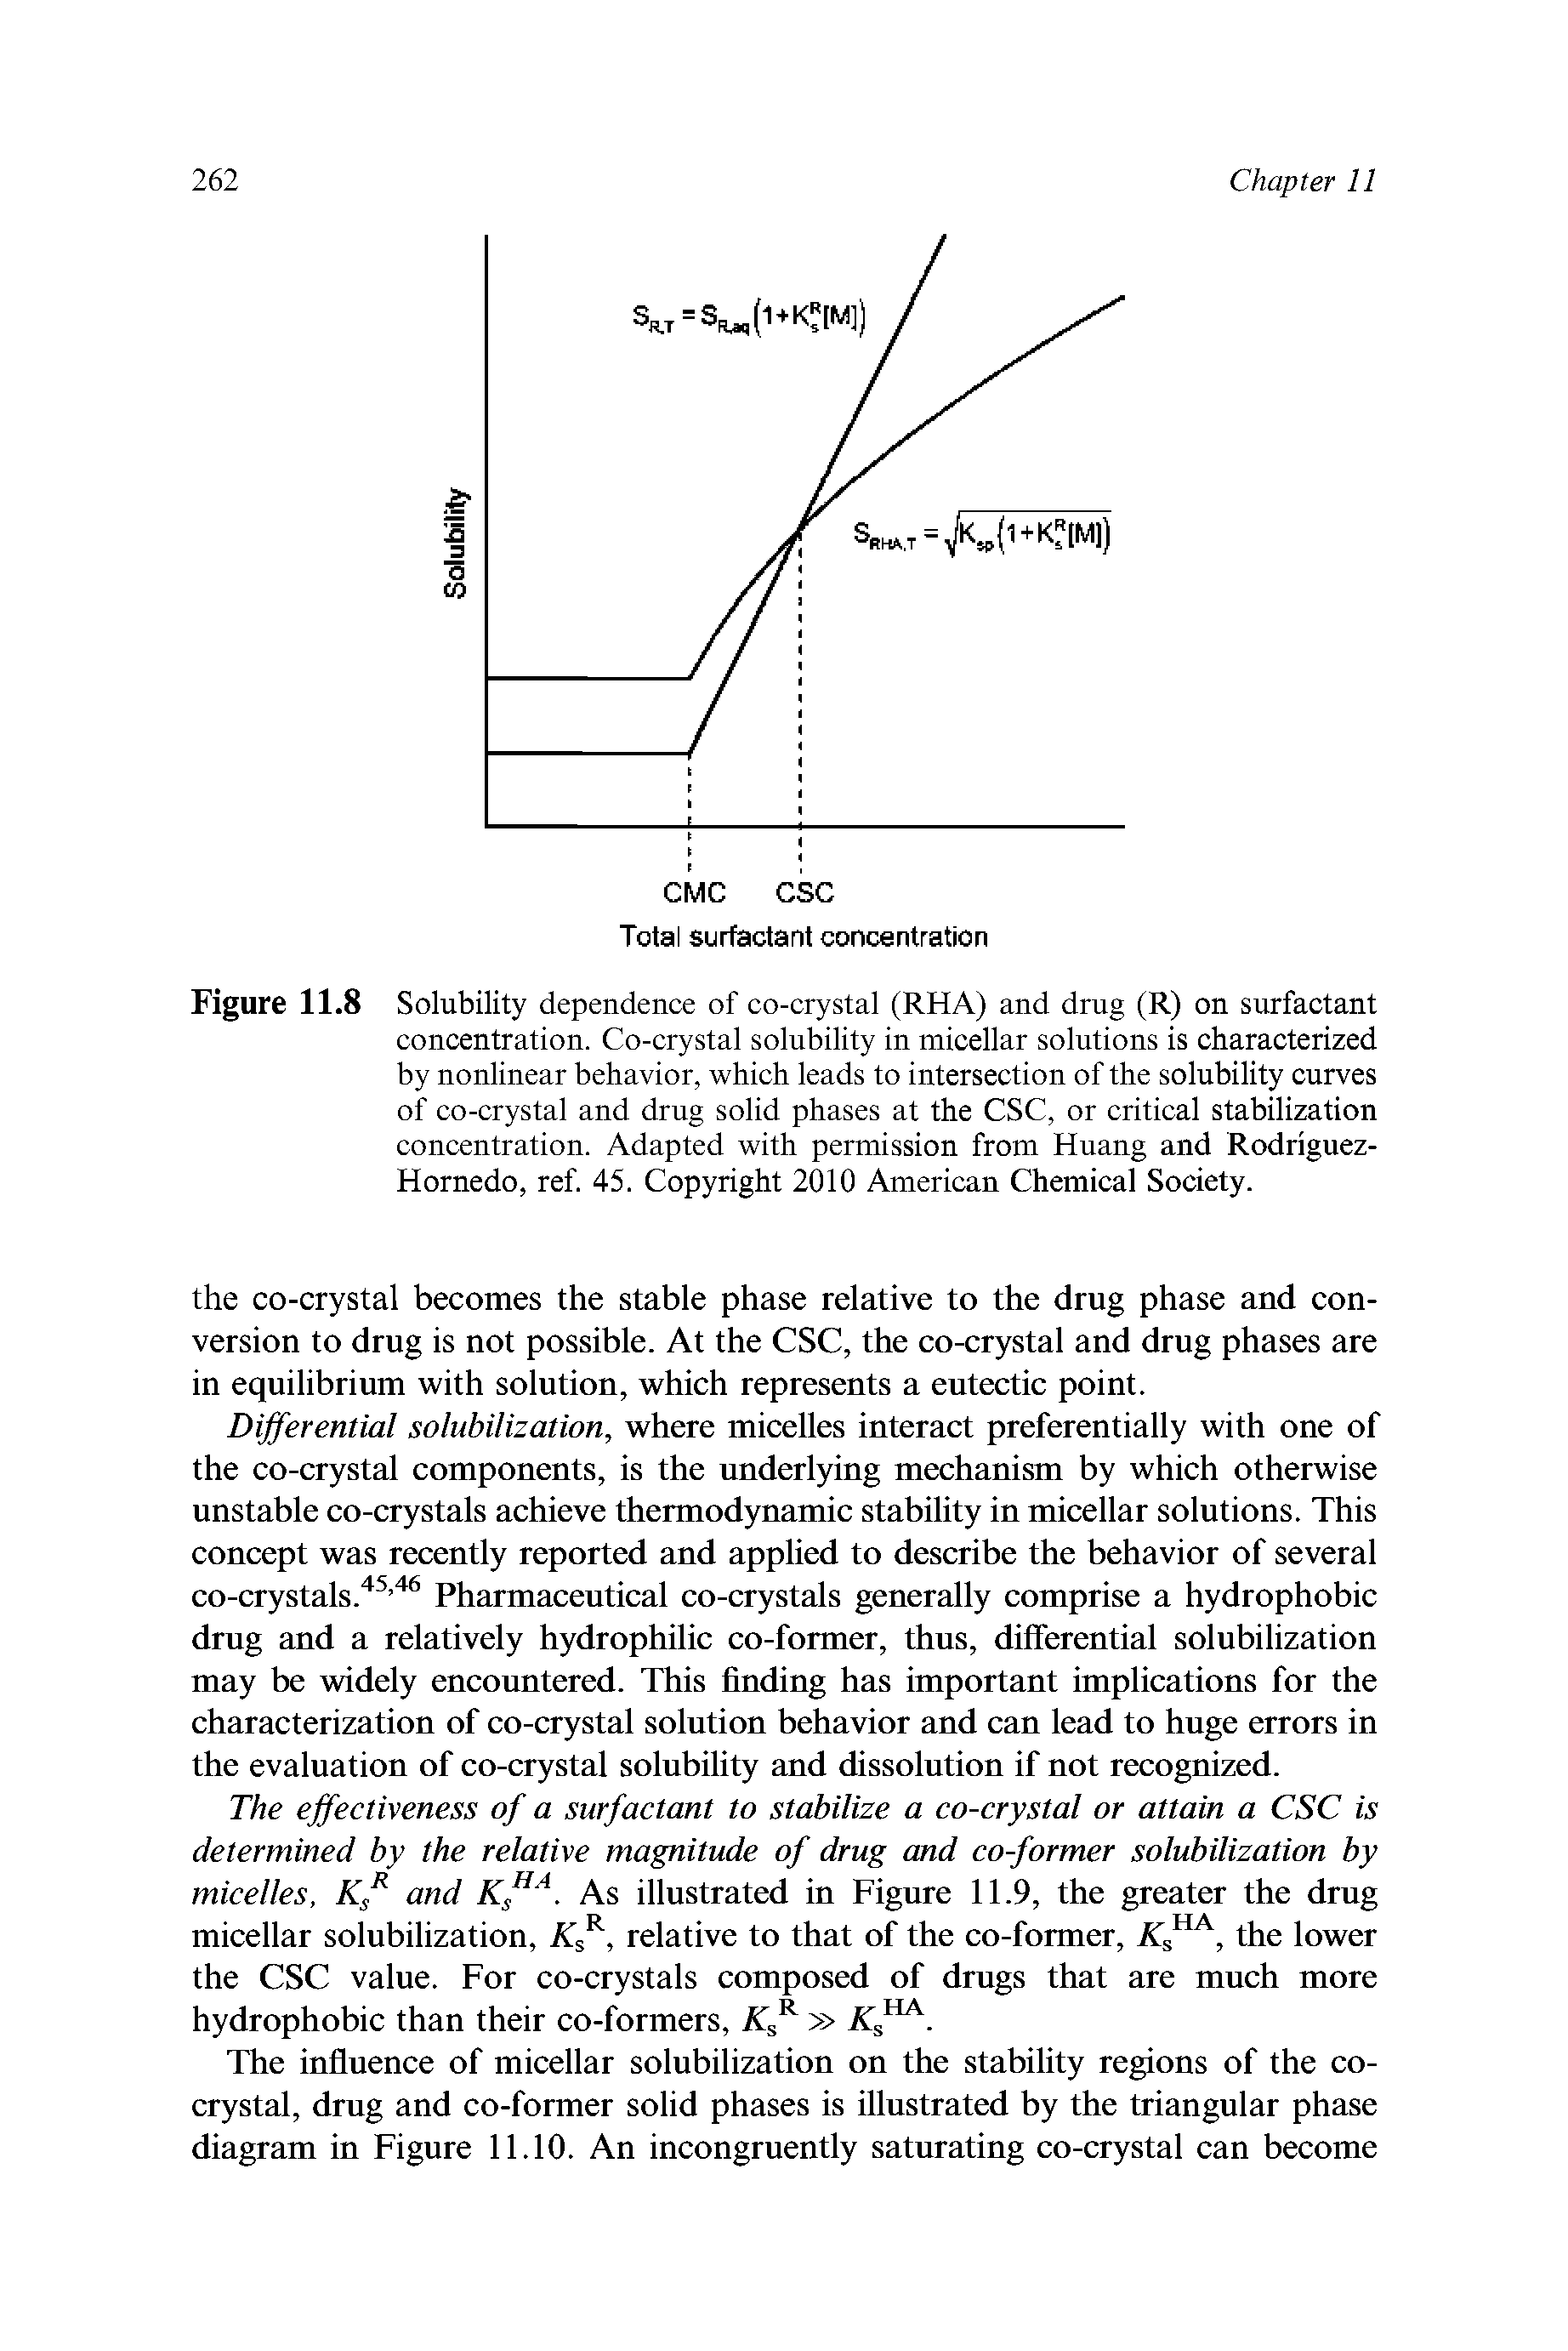 Figure 11.8 Solubility dependence of co-crystal (RHA) and drug (R) on surfactant concentration. Co-crystal solubility in micellar solutions is characterized by nonlinear behavior, which leads to intersection of the solubility curves of co-crystal and drug solid phases at the CSC, or critical stabilization concentration. Adapted with permission from Huang and Rodriguez-Hornedo, ref. 45. Copyright 2010 American Chemical Society.